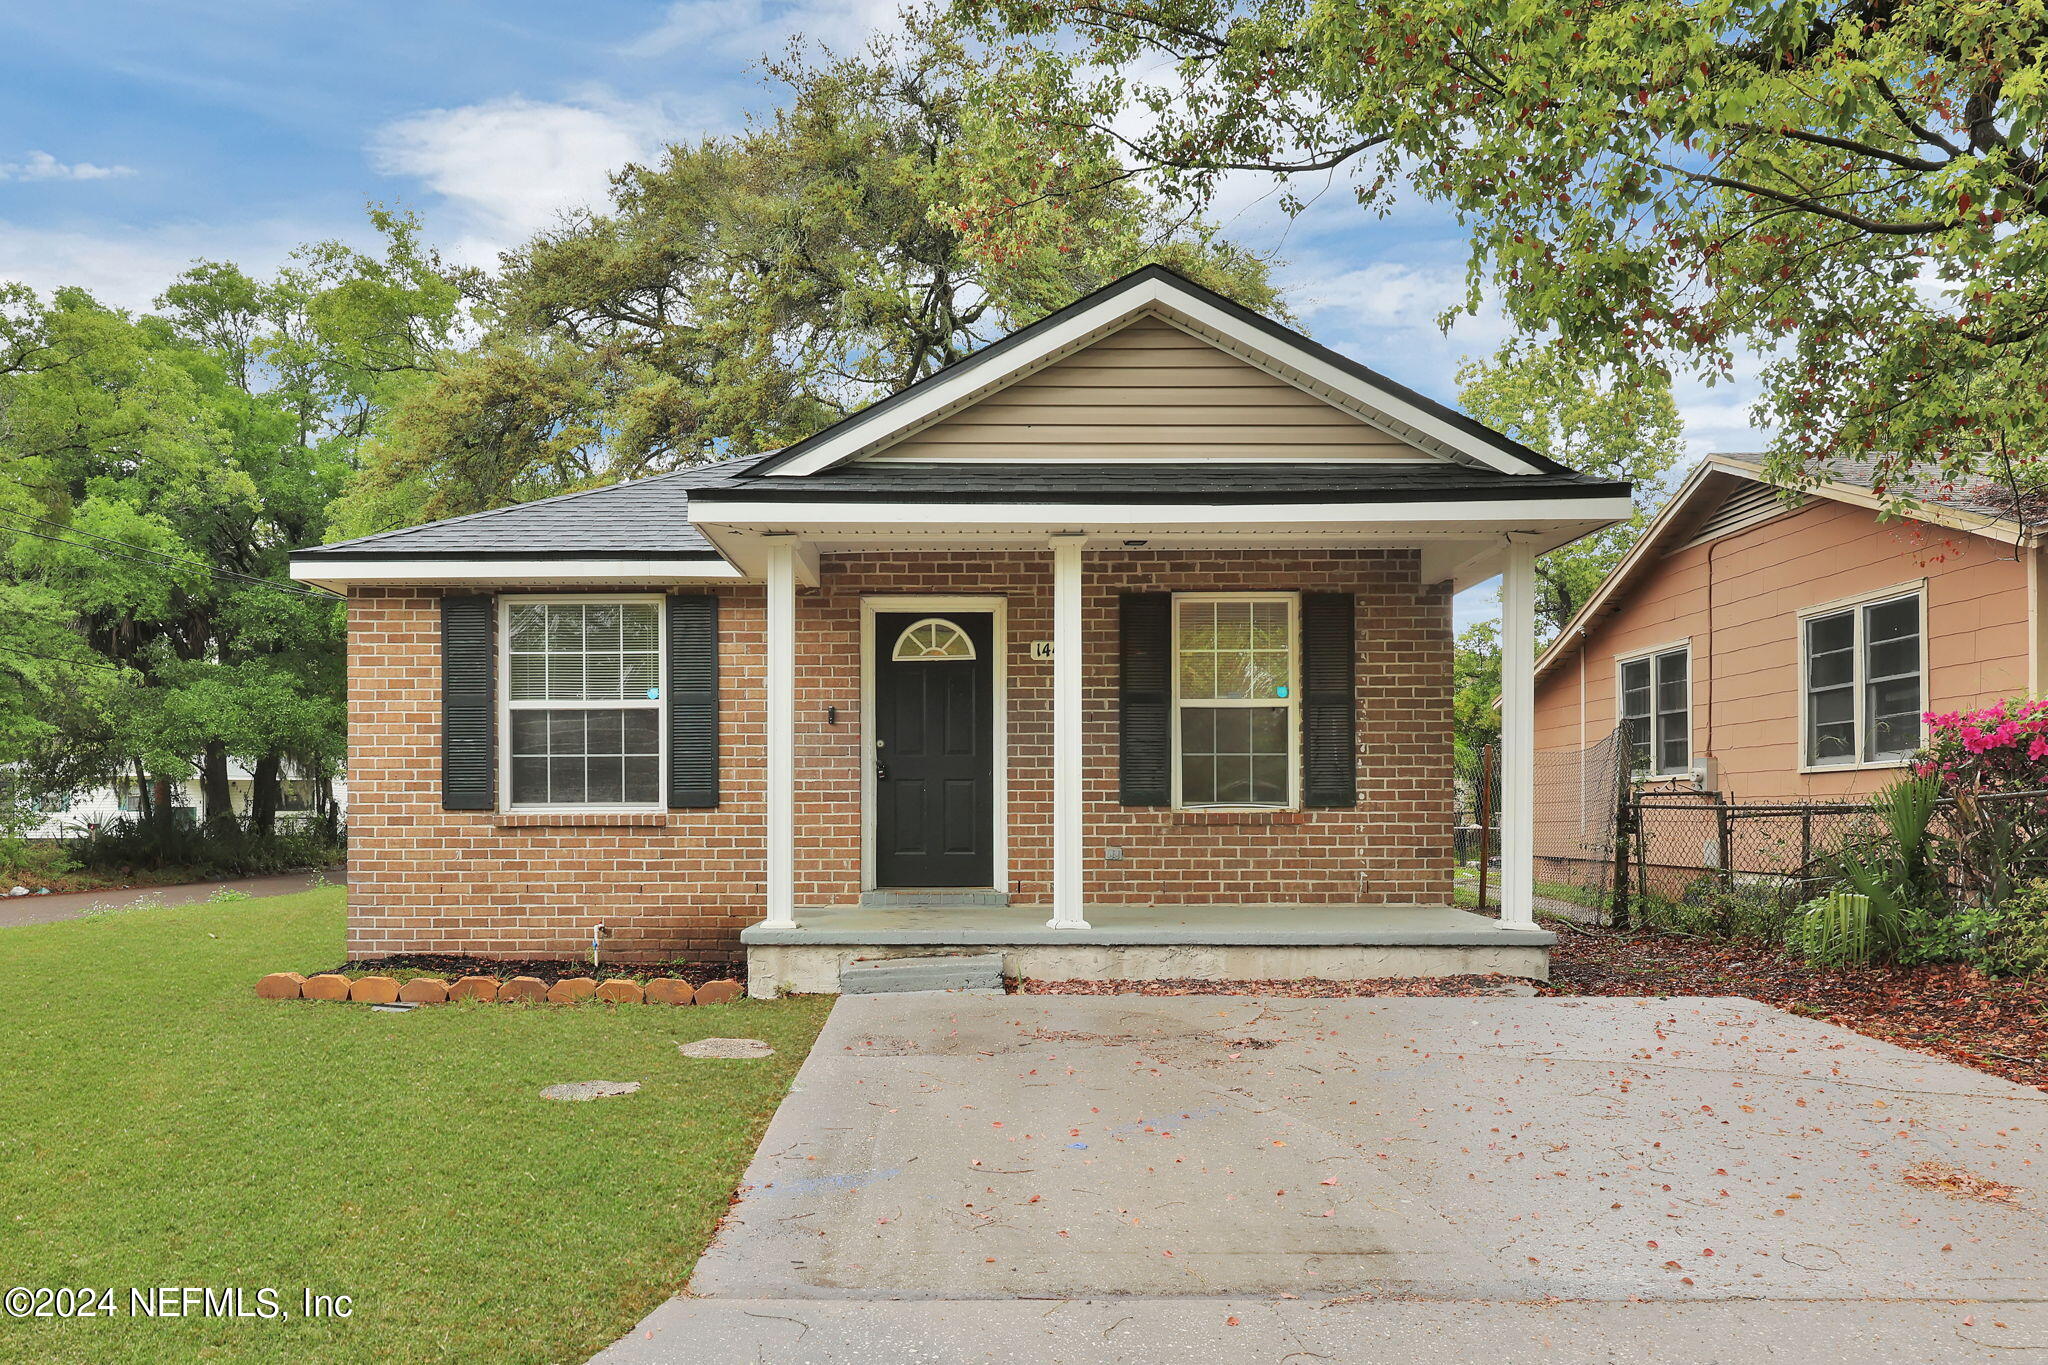 Jacksonville, FL home for sale located at 1441 E 27TH Street, Jacksonville, FL 32206